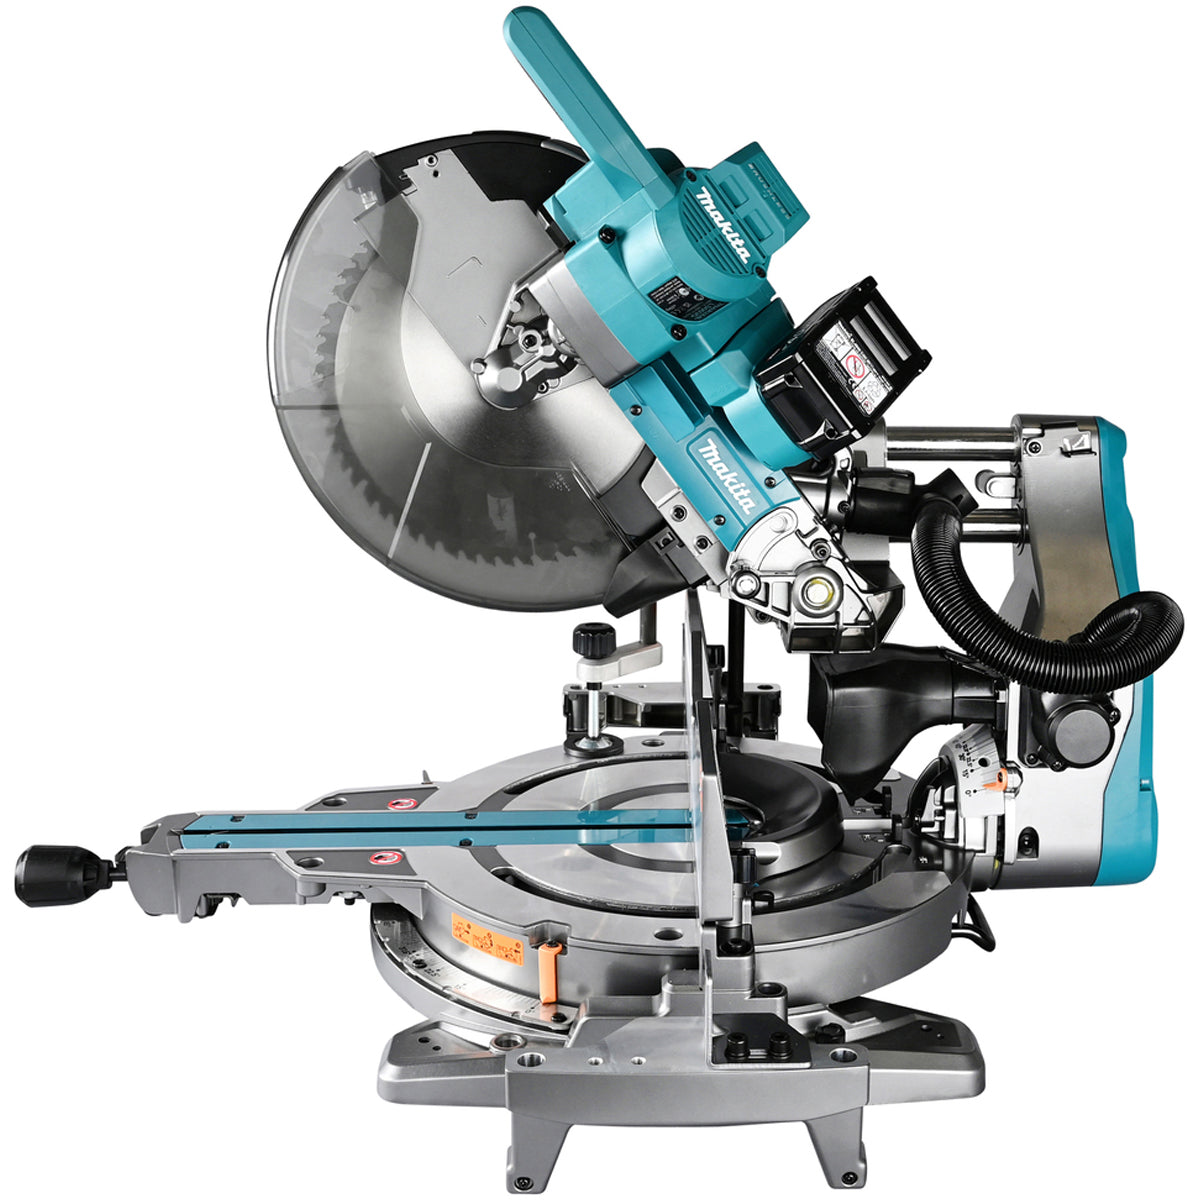 Makita LS003GZ01 40Vmax XGT Brushless 305mm Slide Compound Mitre Saw Body Only